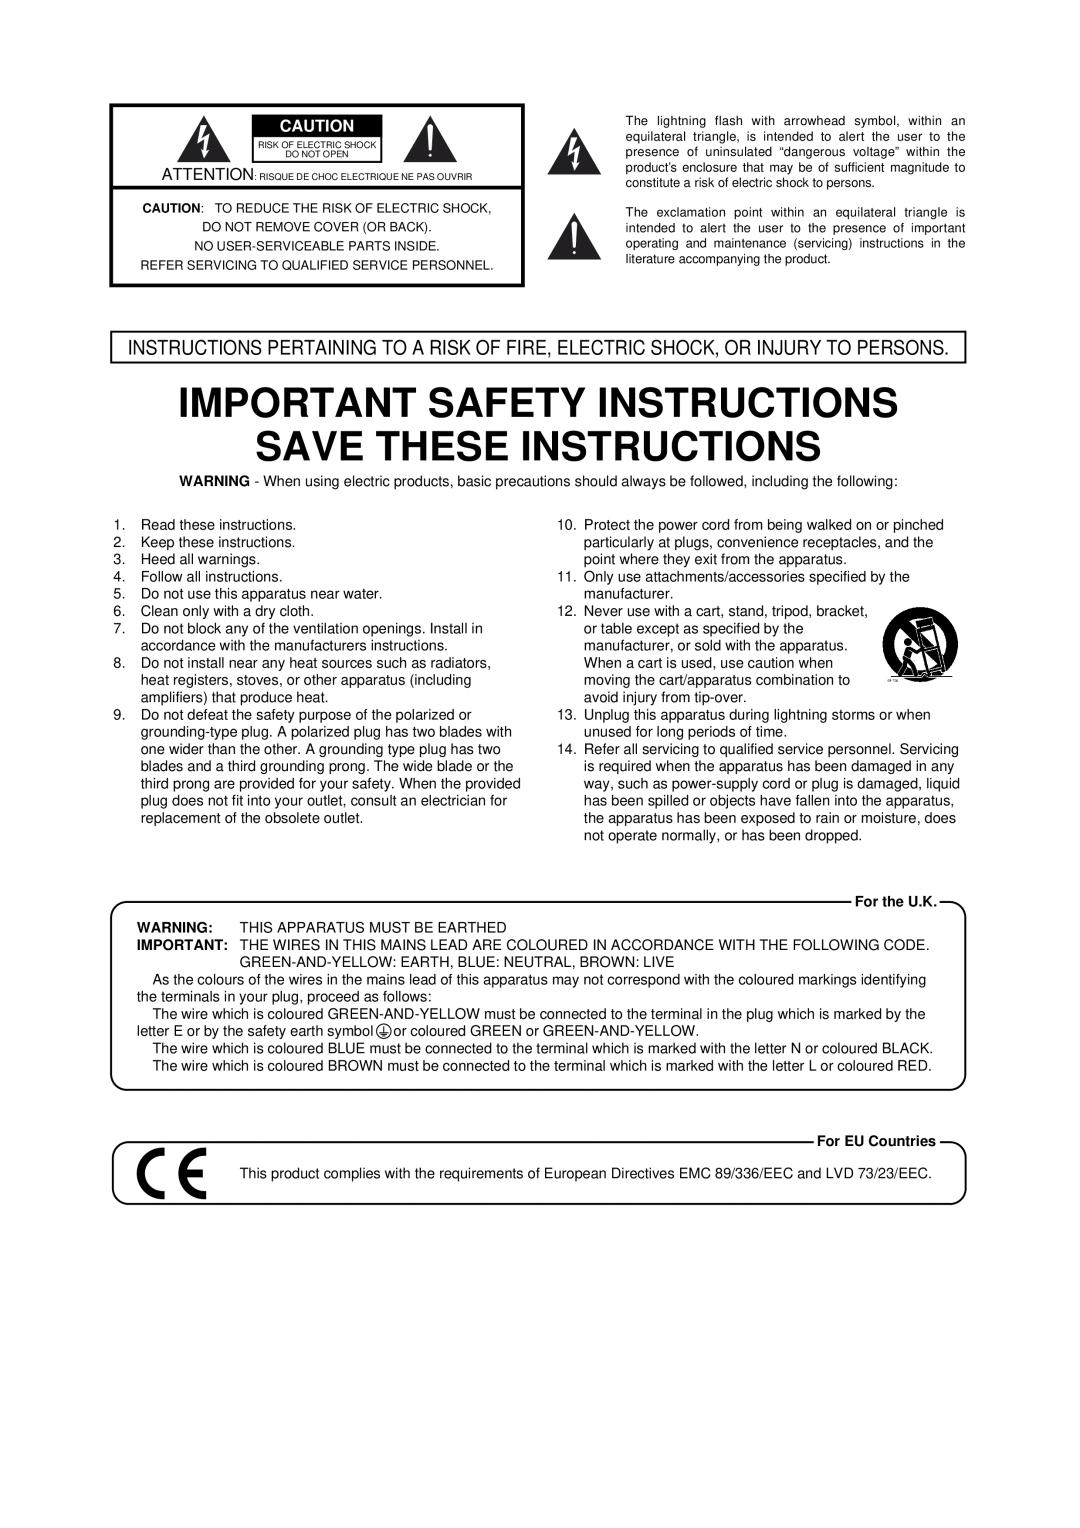 Roland KC-60 owner manual Important Safety Instructions Save These Instructions, For the U.K, For EU Countries 